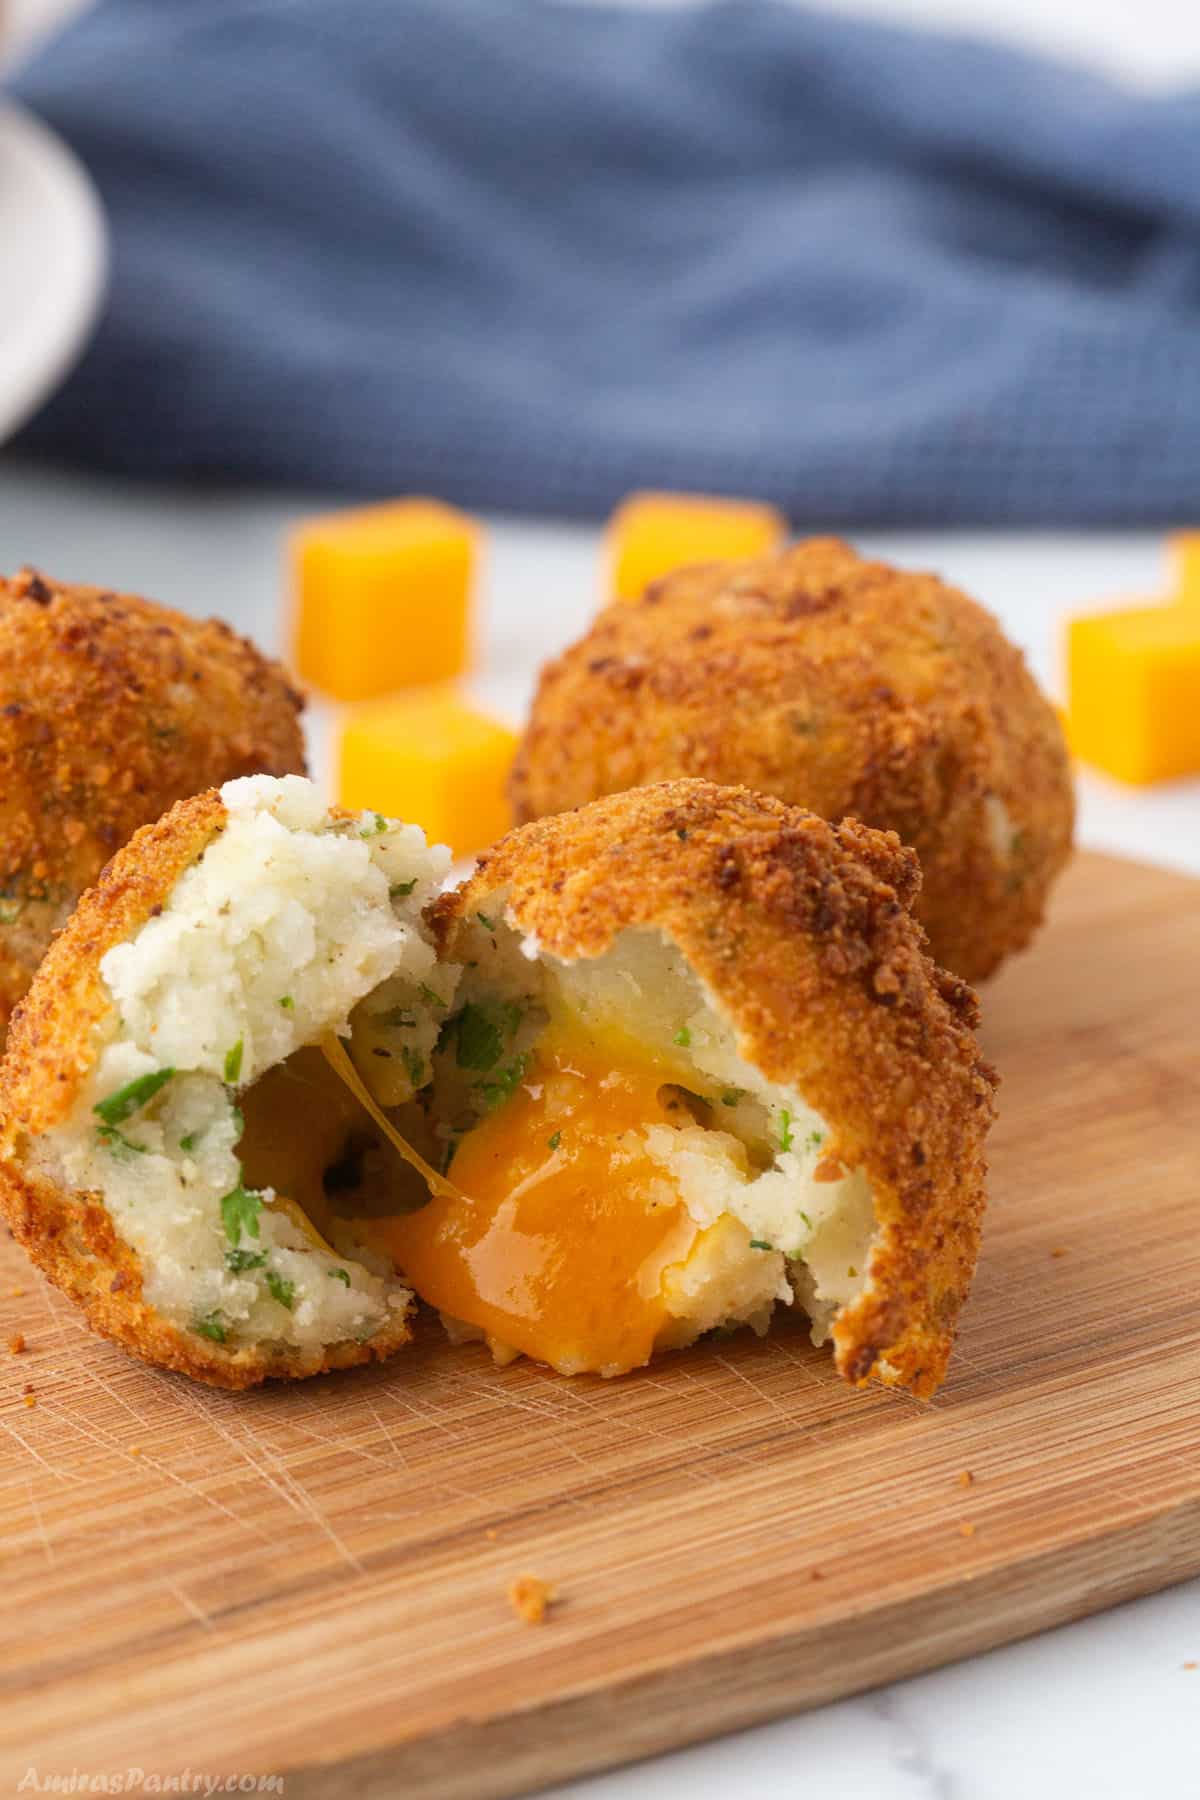 Potato balls on a odden board with one open showing oozing cheese.